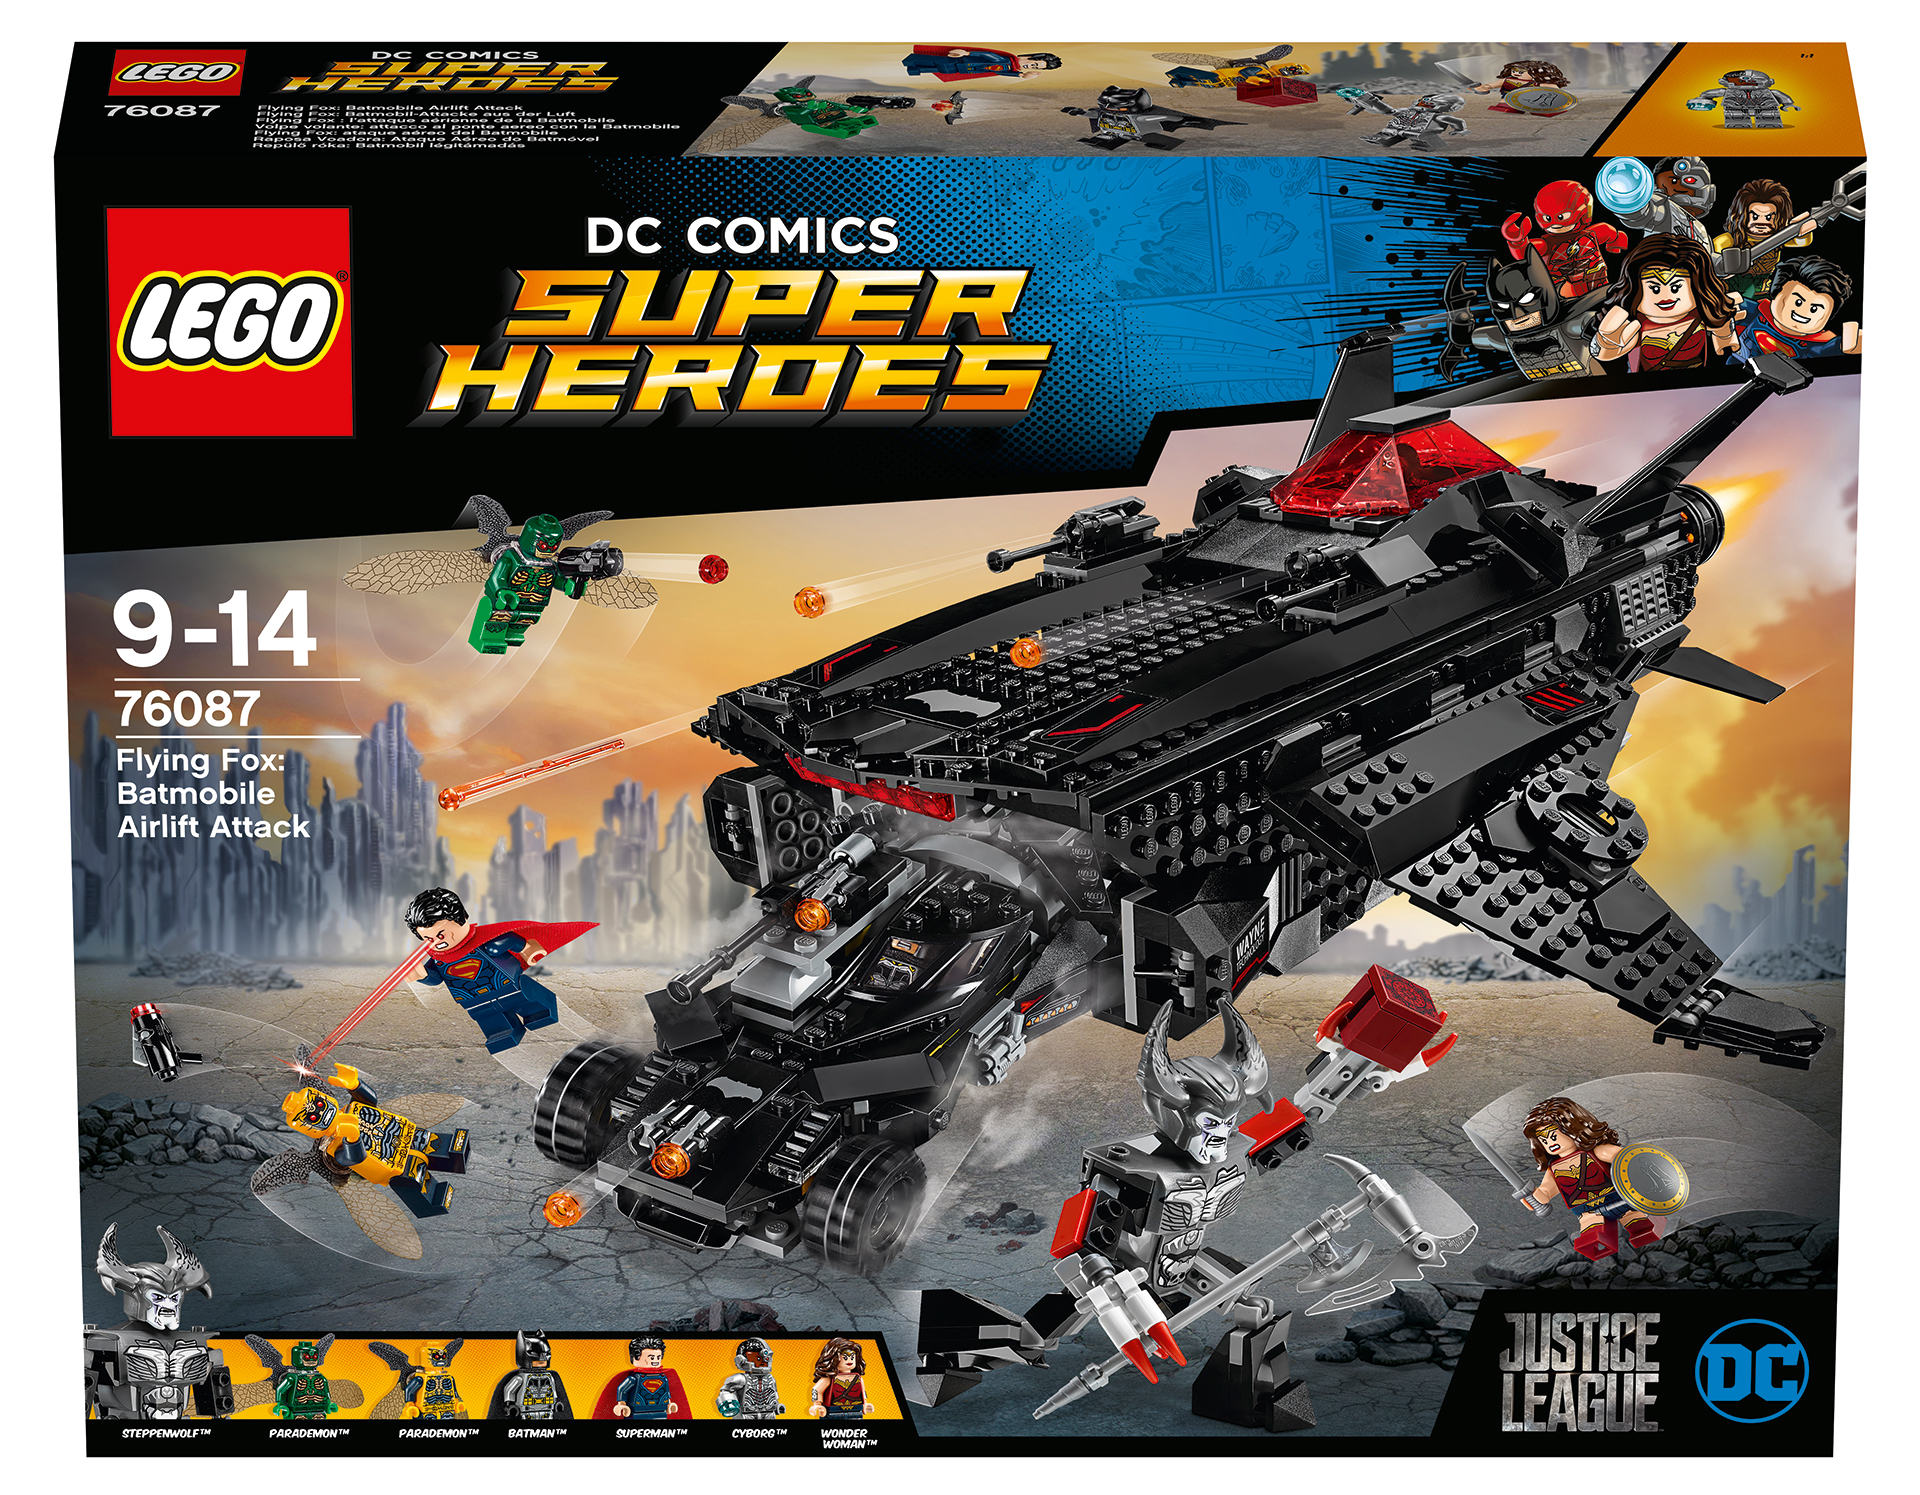 The Justice League Movie LEGO Sets Are Super-Friendly